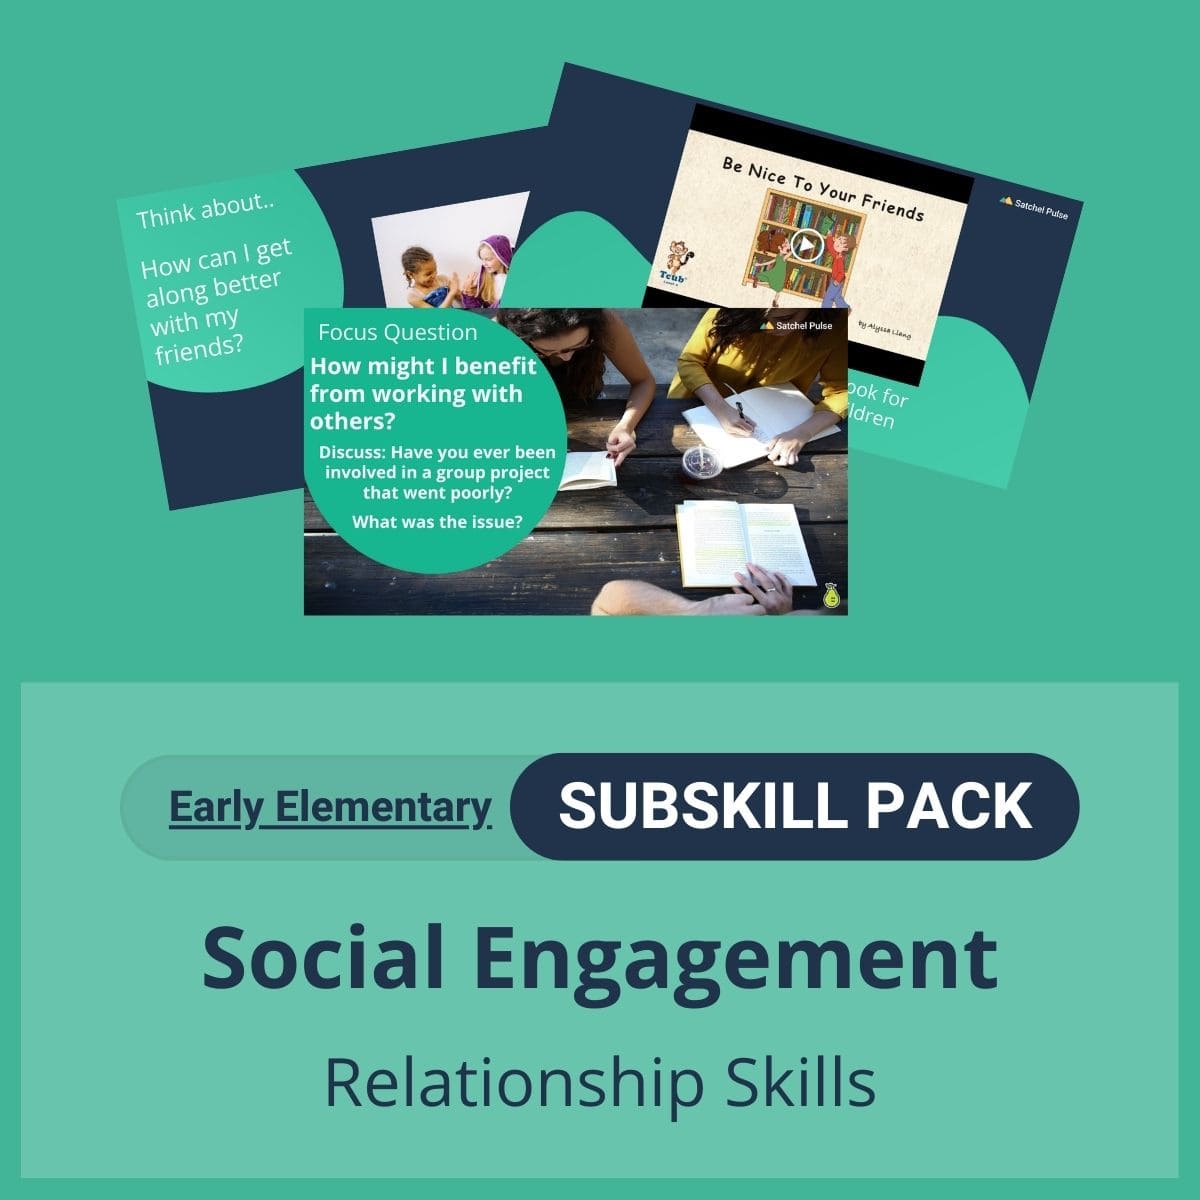 SEL Resource pack with social-emotional learning lessons and self-studies to help you teach Social Engagement in your classroom as a part of the SEL curriculum.